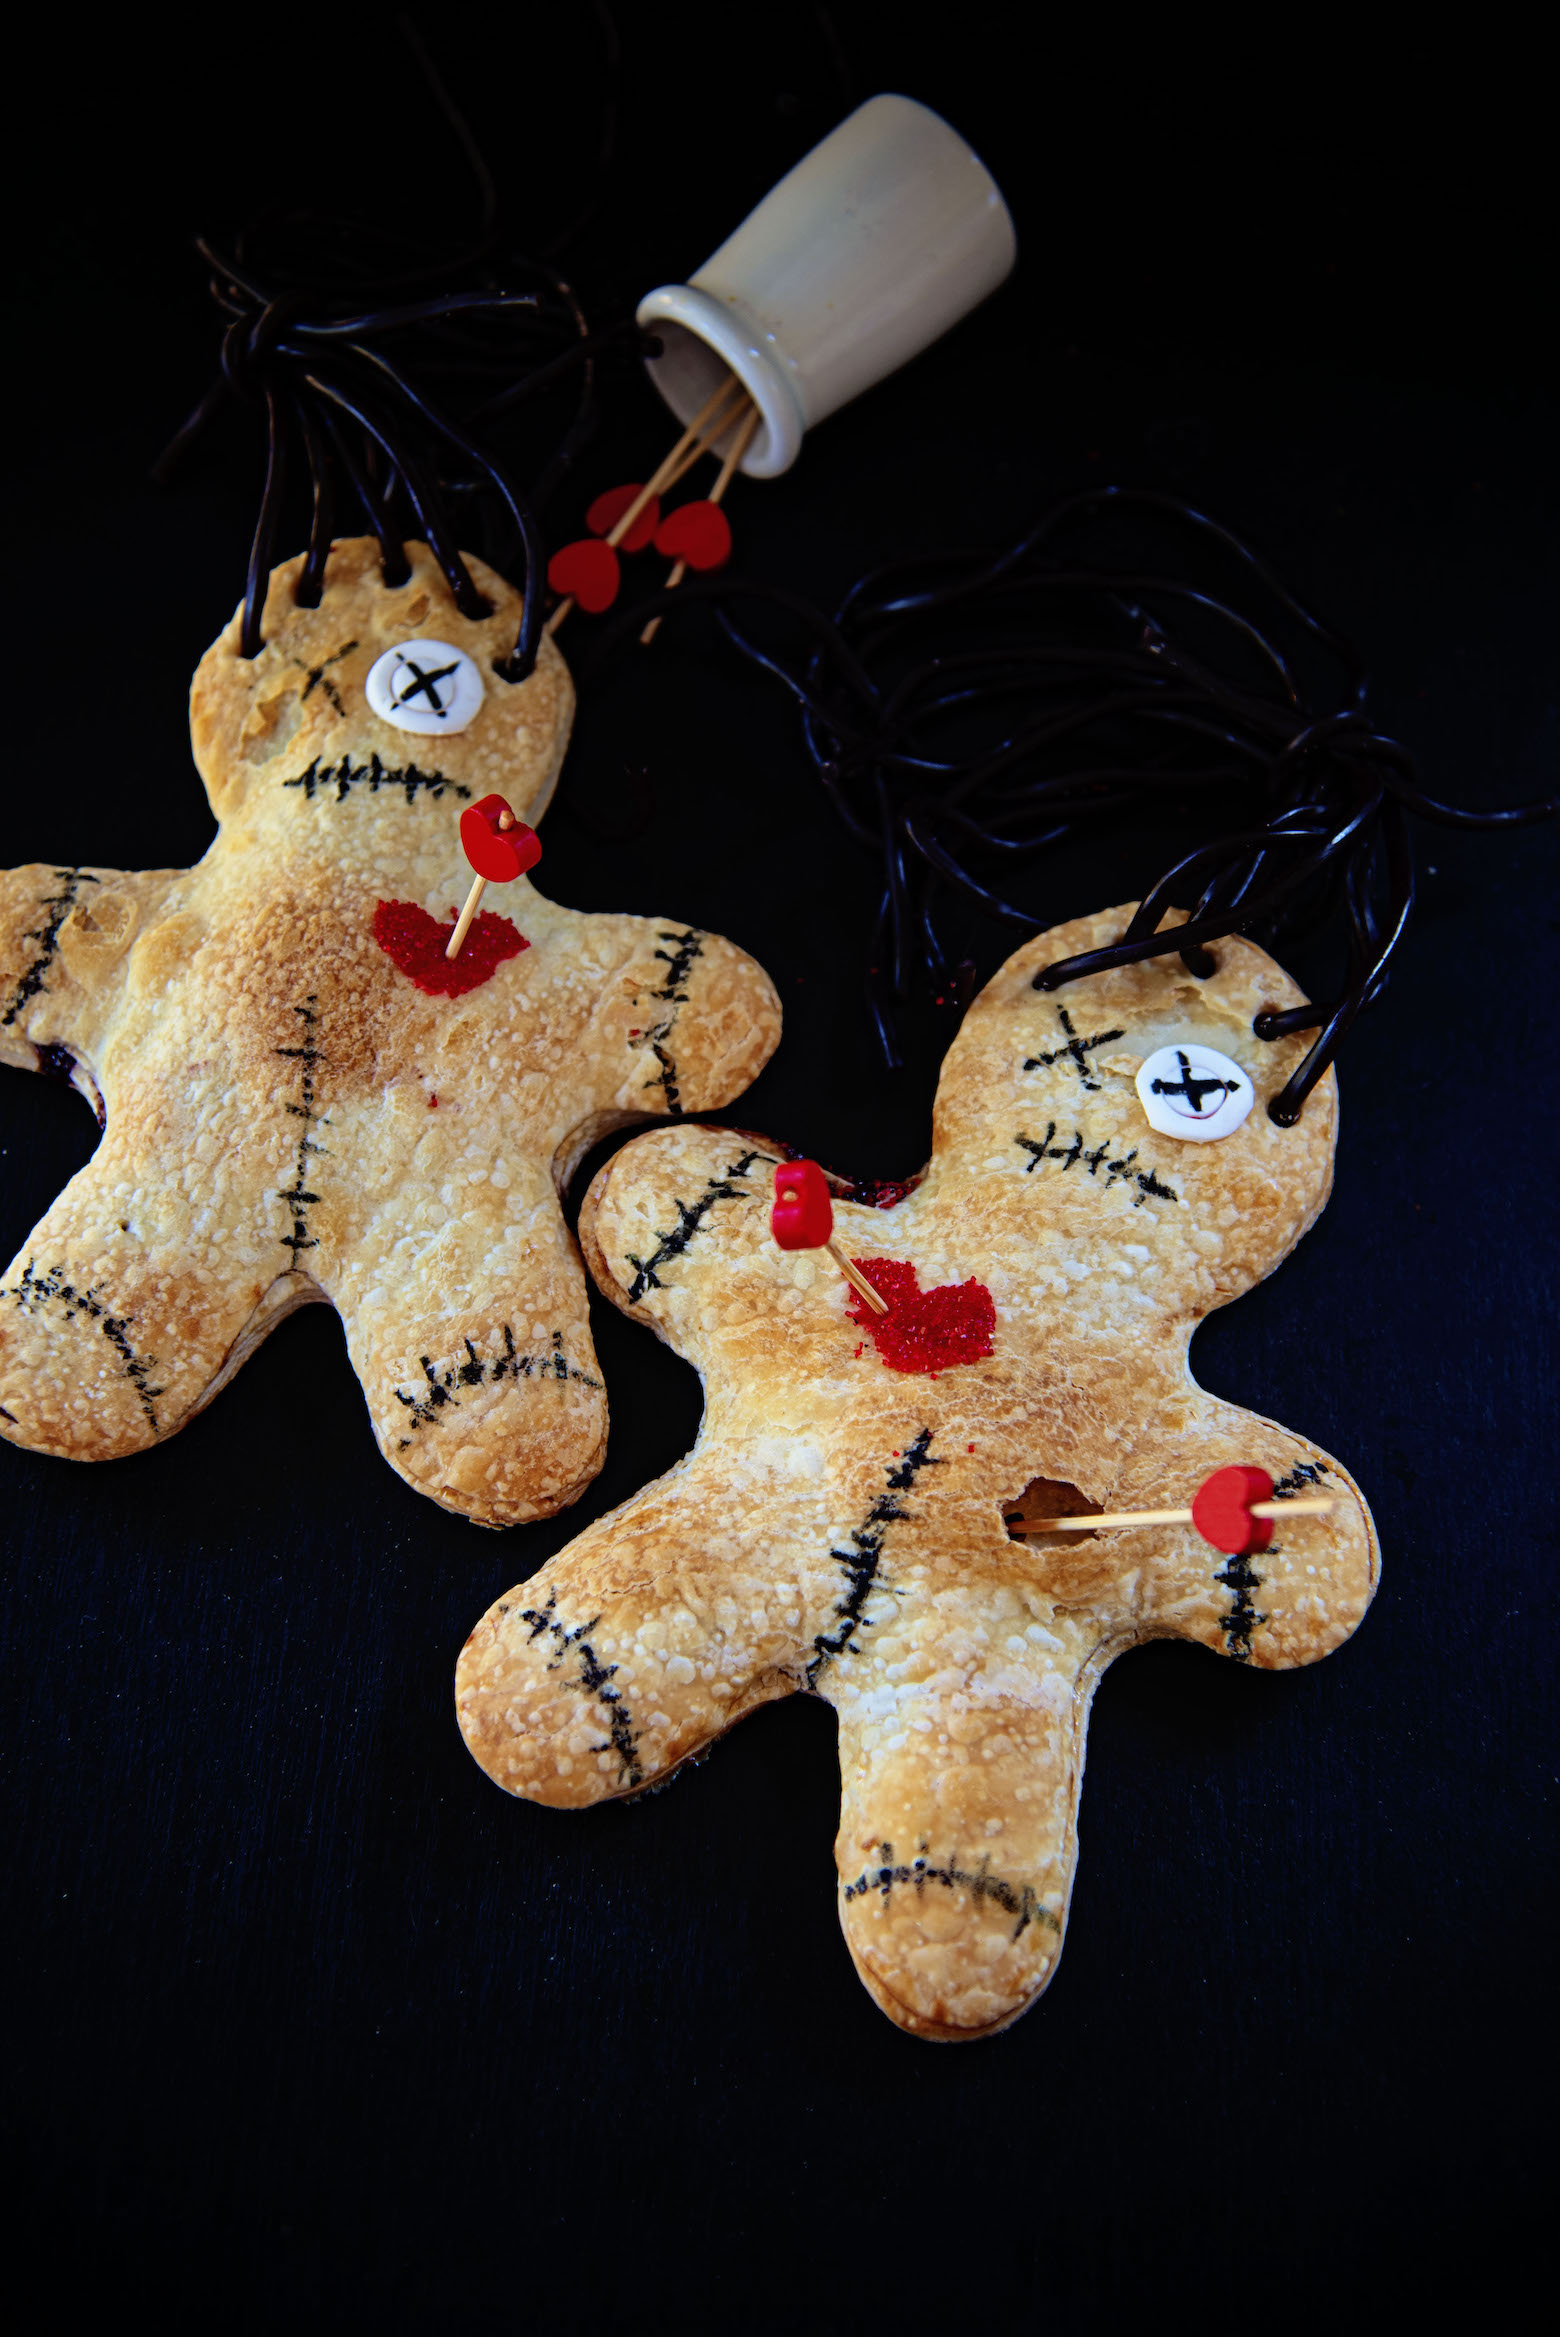 Two Voodoo Doll Hand Pies on a black background